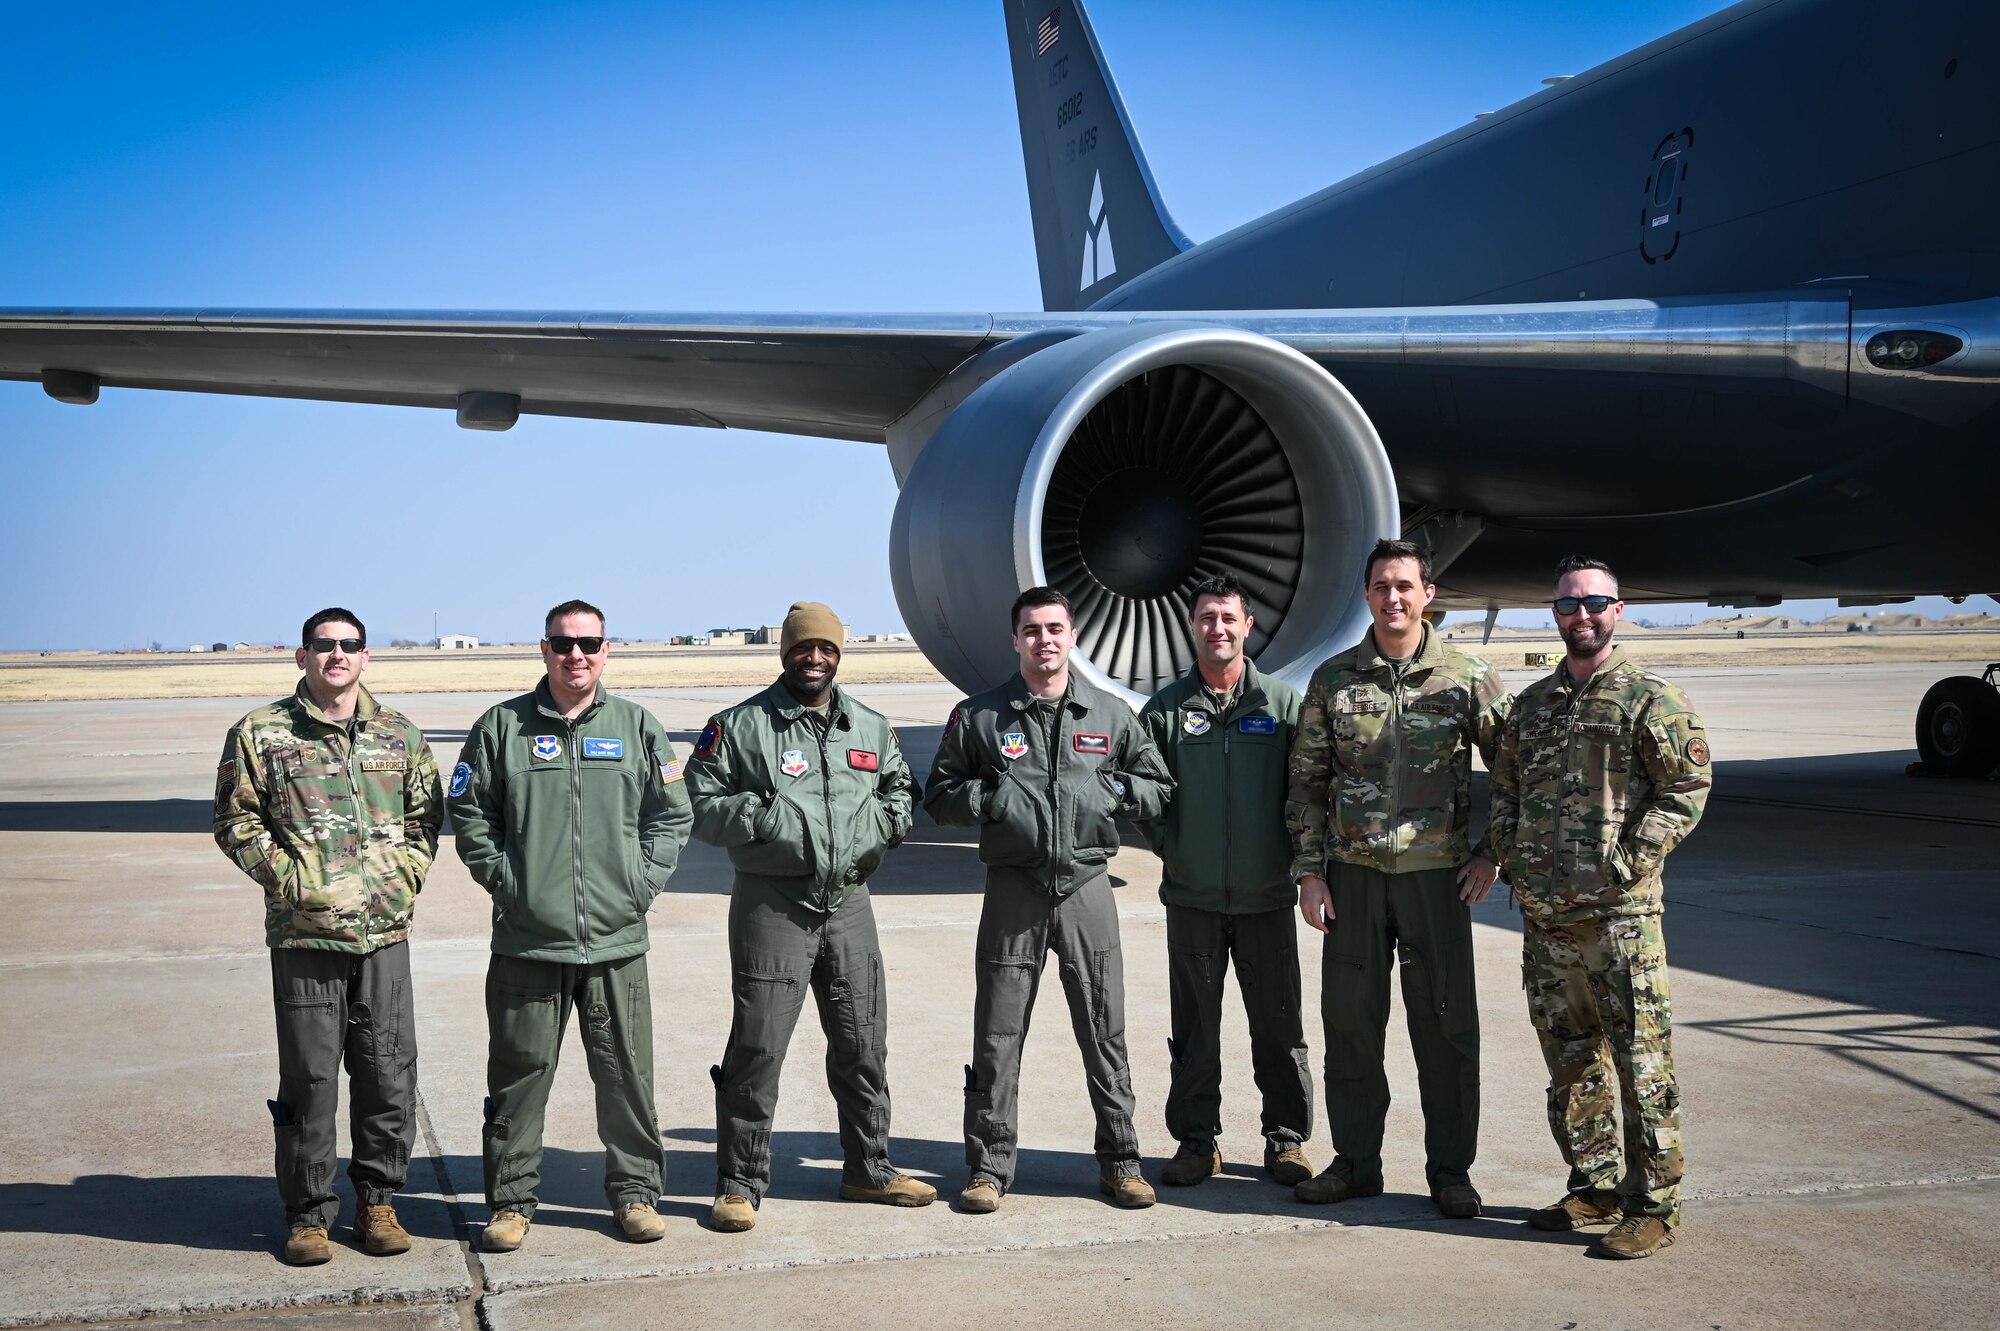 KC-46 Pegasus aircrew and sensor operators pose for a group photo after flying at Altus Air Force Base, Oklahoma, March 10, 2022. The crew completed several types of training during the flight, including receiving and giving air refueling, “touch and gos” and an auto-land full stop. (U.S. Air Force photo by Senior Airman Kayla Christenson)